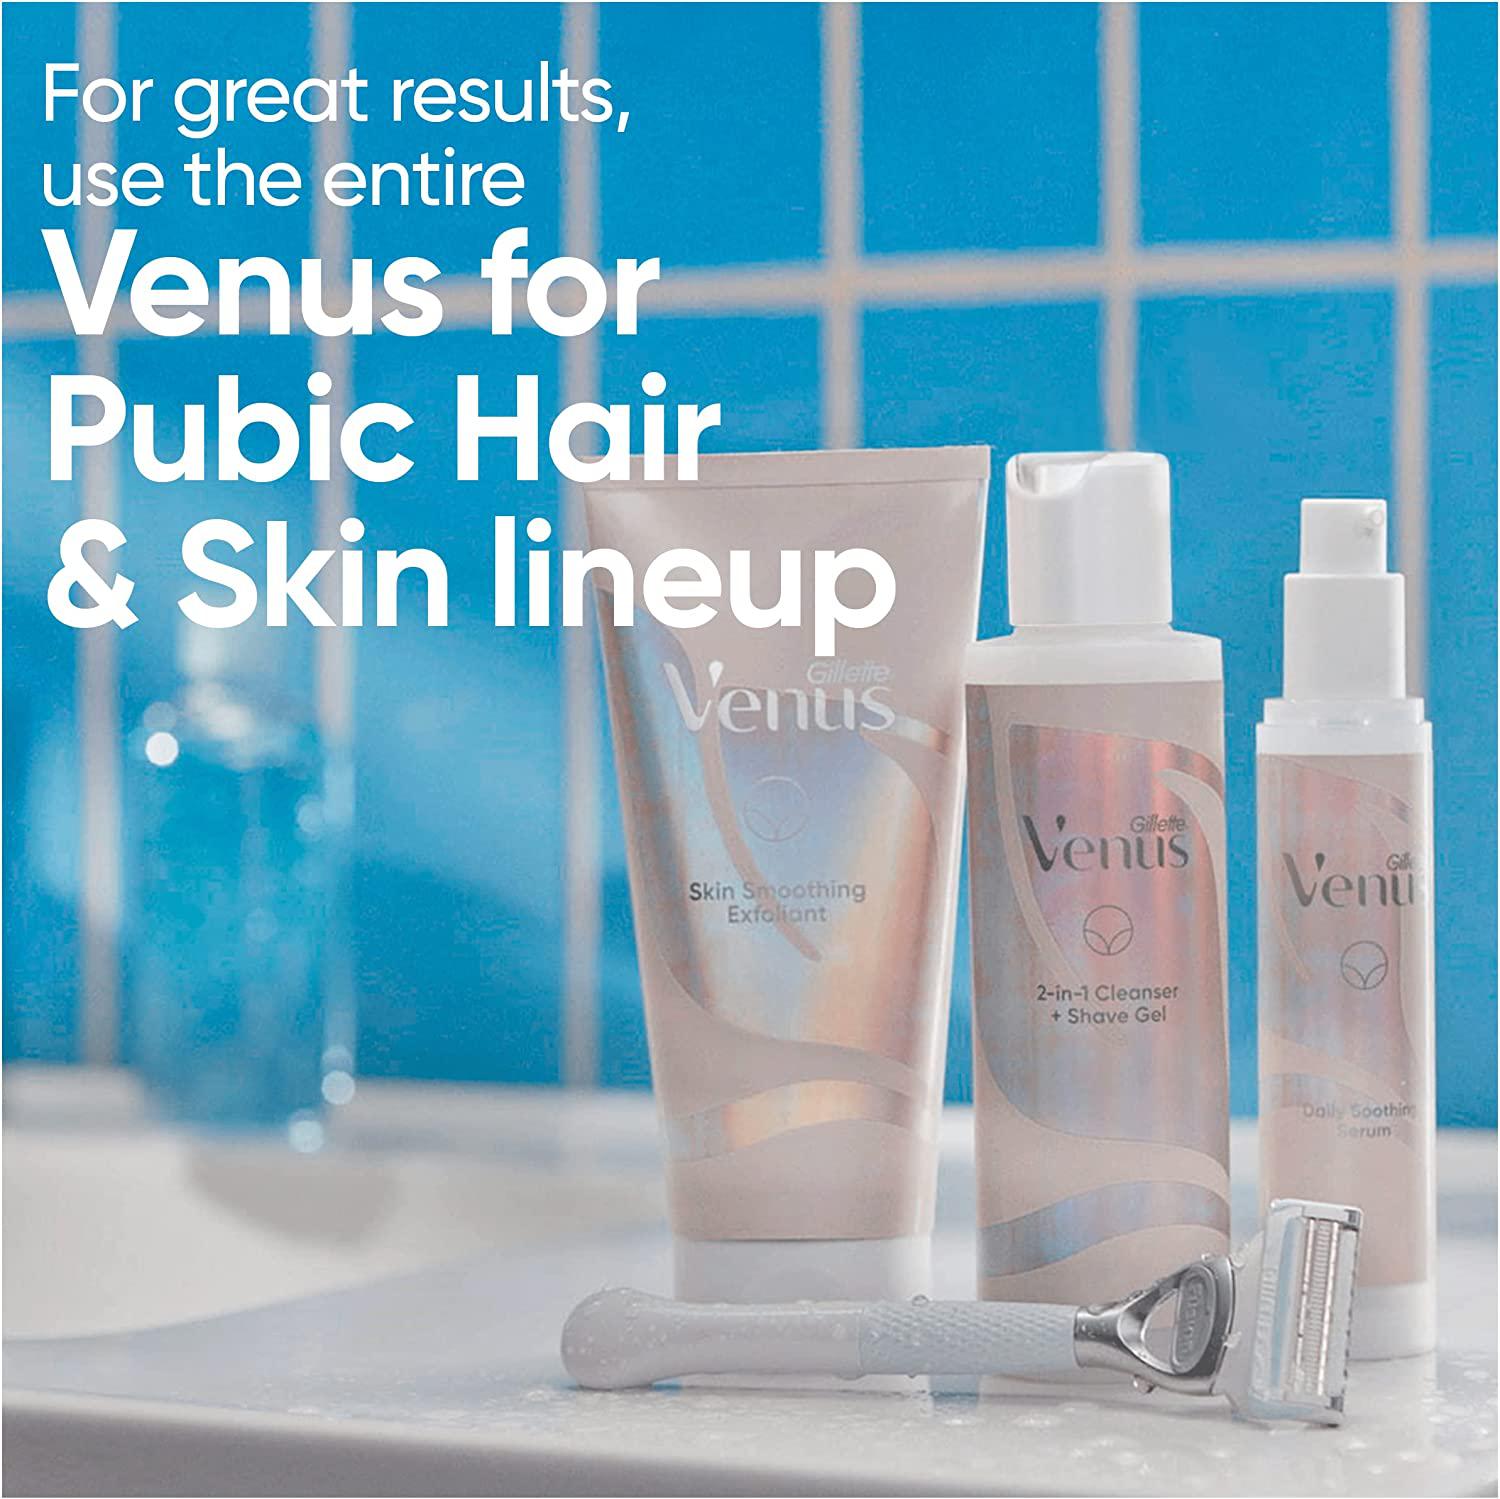 Gillette Venus for Pubic Hair & Skin Women's Razor, 2 Blade Refills and 2in1 Shave Gel and Cleanser 190ml - Healthxpress.ie